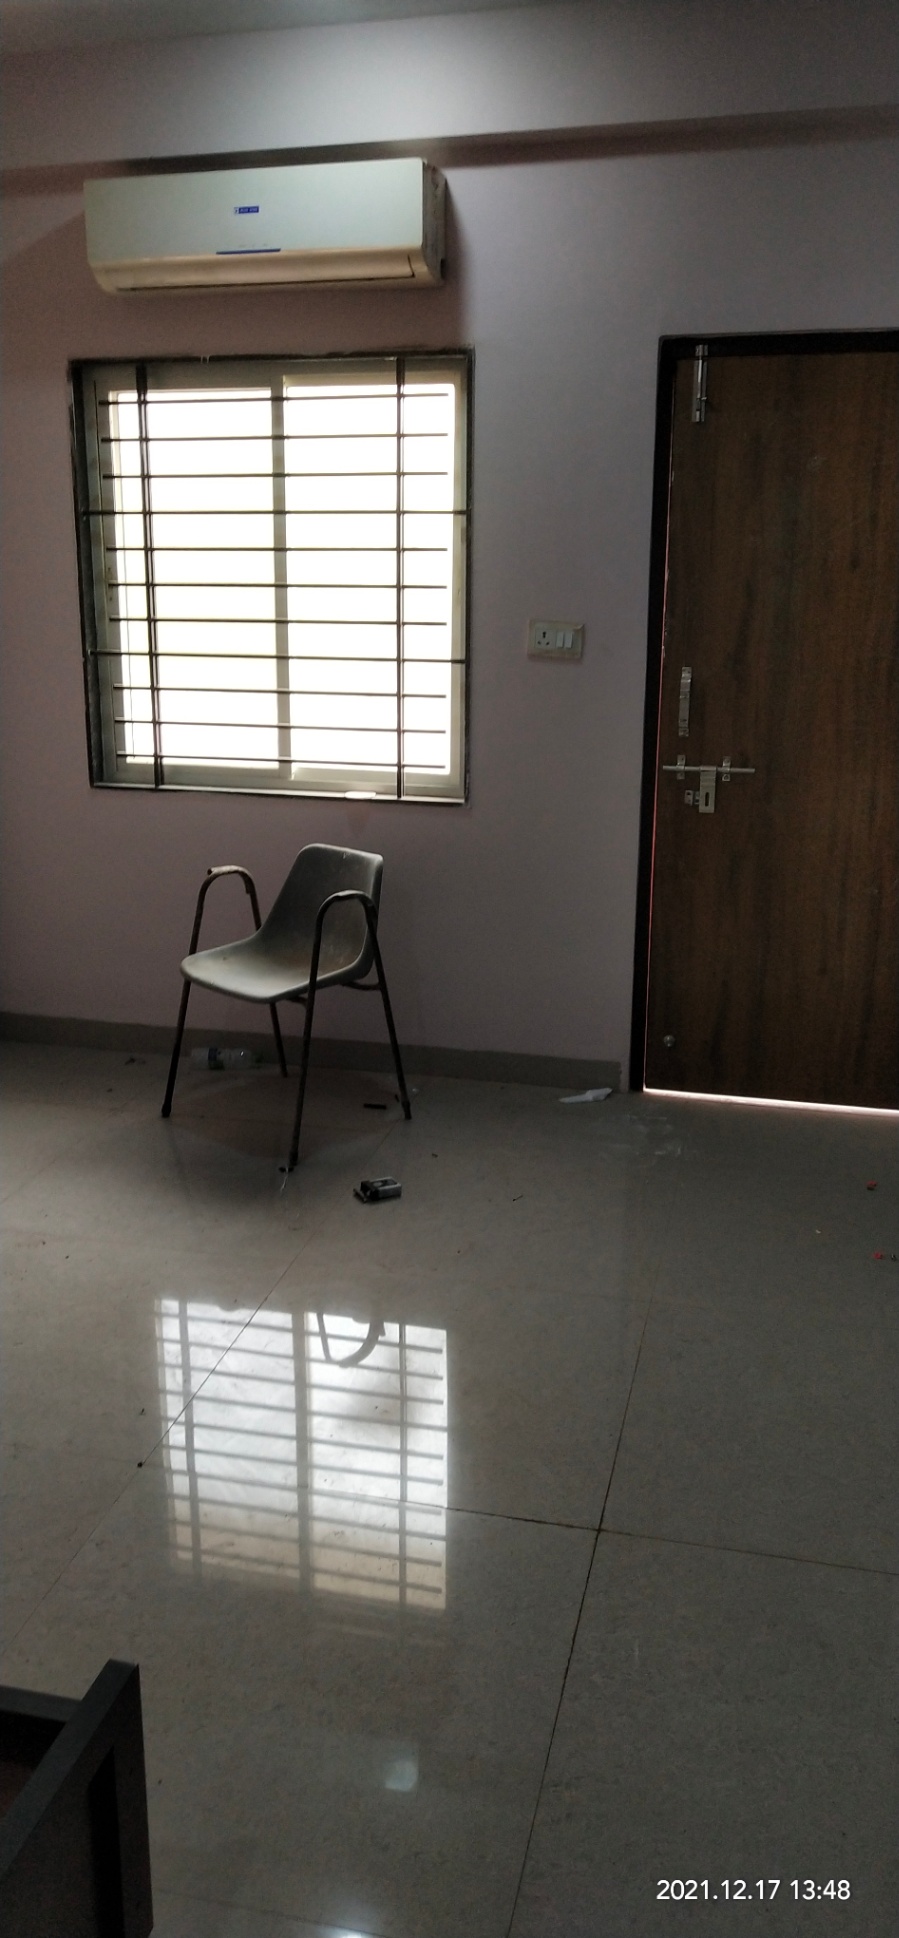 PG/ Roommate for rent @Geeta bhawan indore